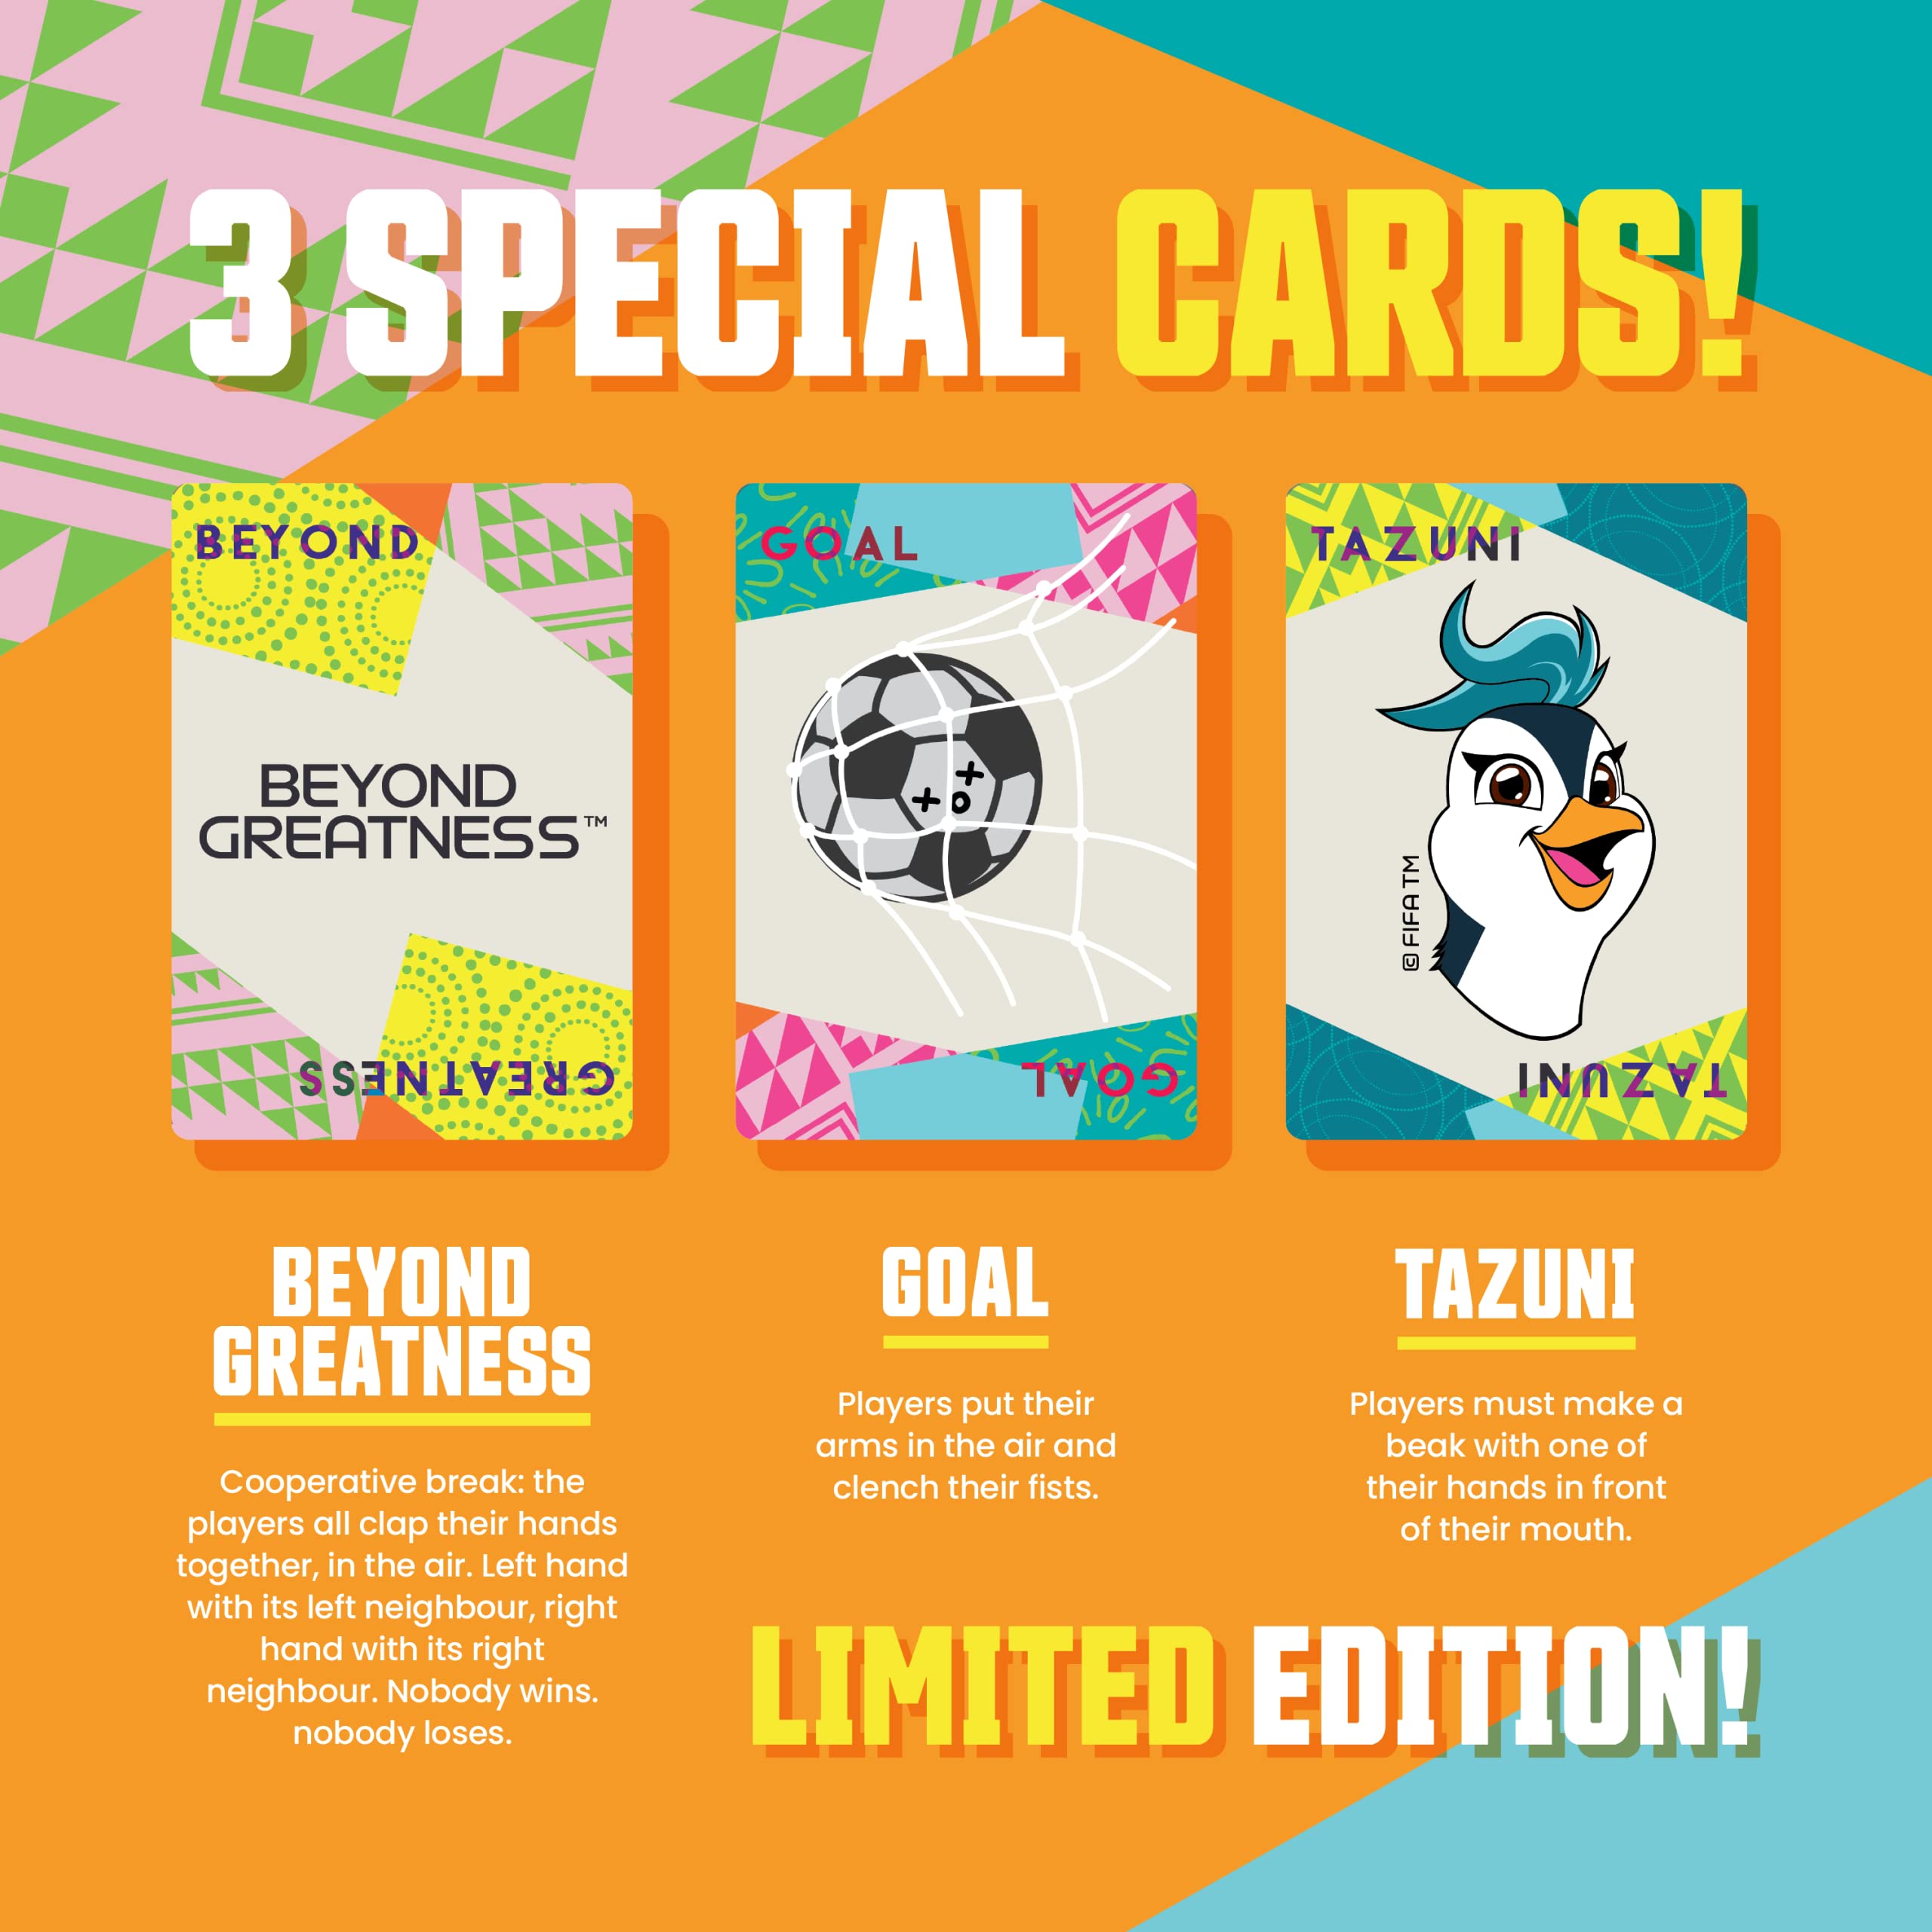 Taco Cat Goat Cheese Pizza – 2023 FIFA Women’s World Cup – Limited Edition! Fun Family Card Game for Kids and Adults - Great for Soccer Lovers, Travel, Vacation - Ages 8+, 10 min Play, 2-8 Players